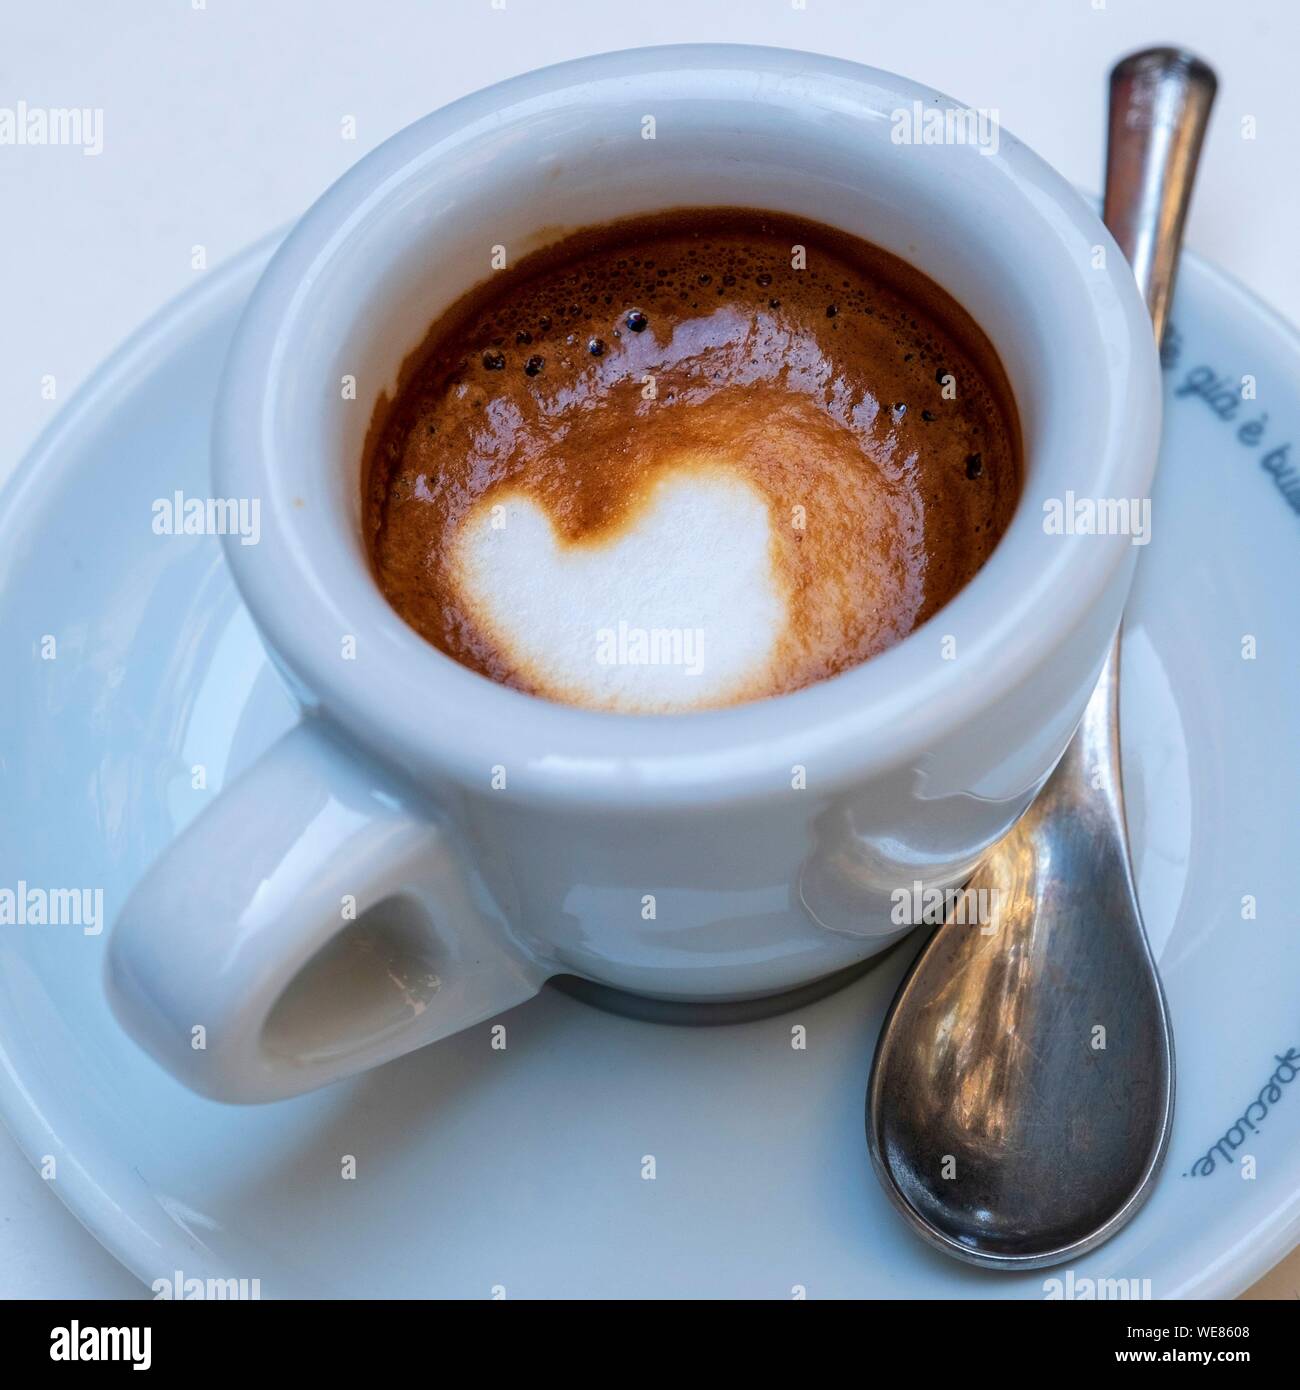 Italy, Campania, Naples, historical centre listed as World Heritage by UNESCO, machiatto coffe Stock Photo